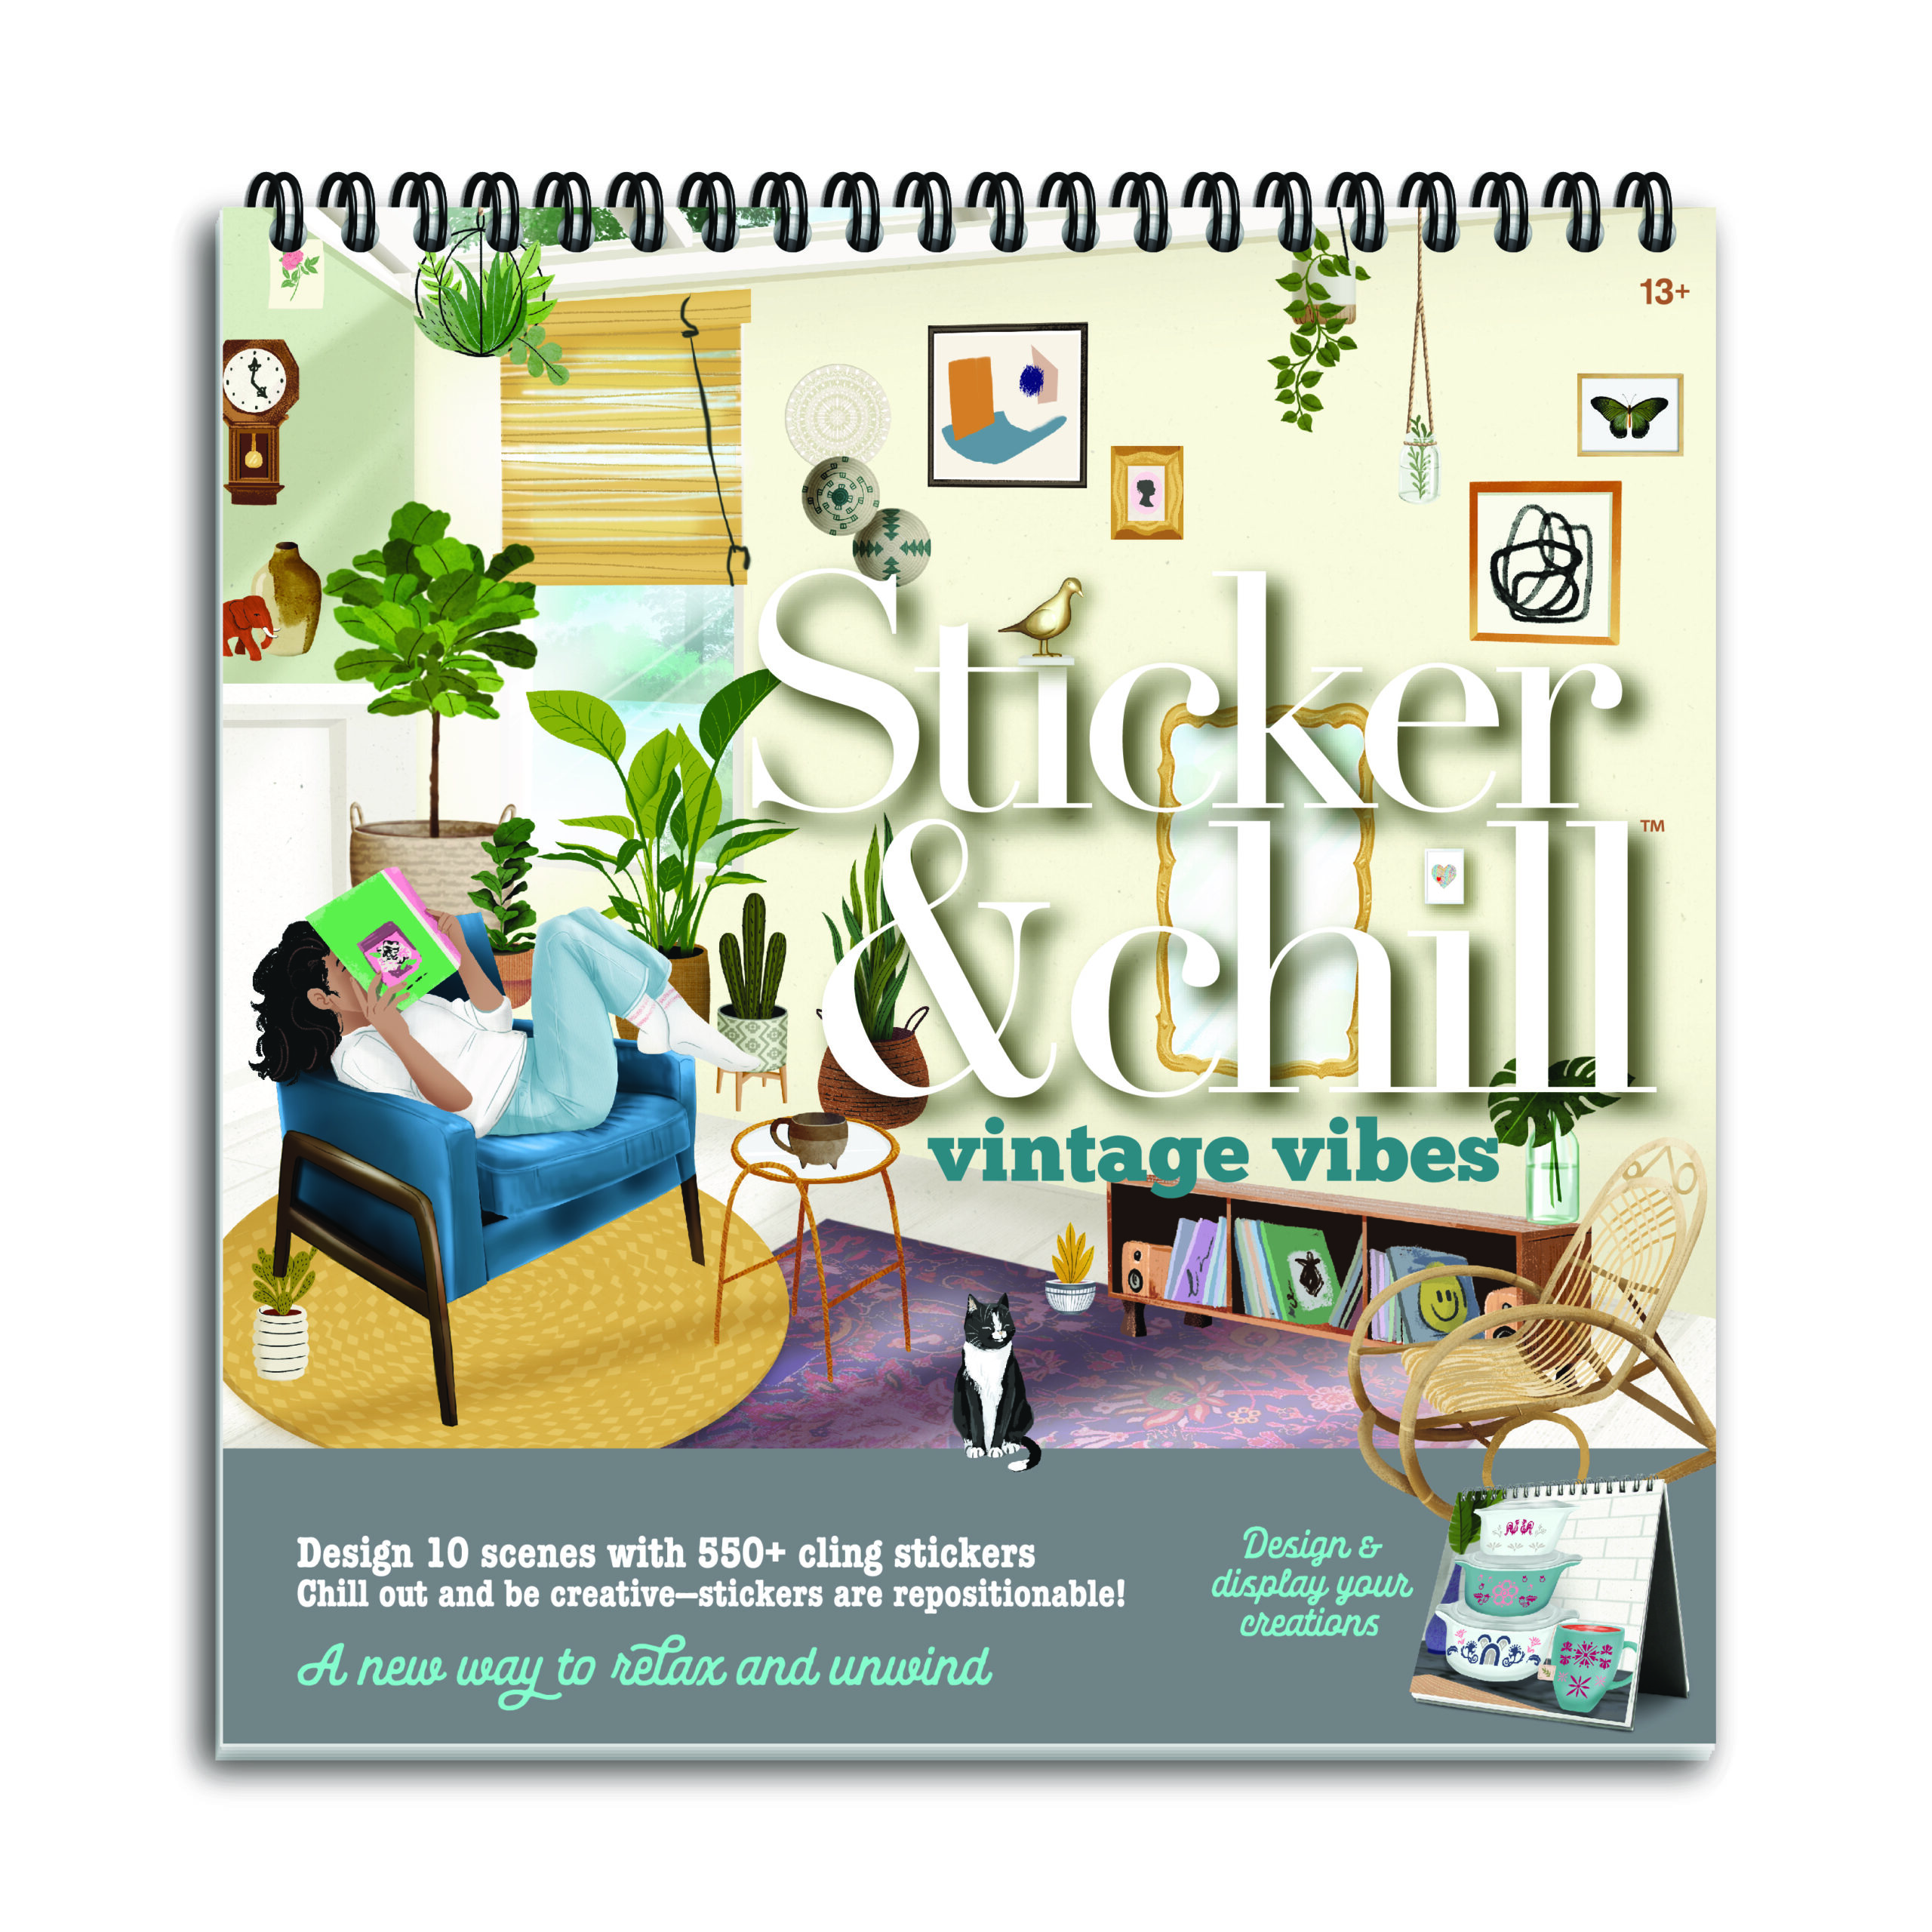 Static Cling Stickers, Repositionable Stickers